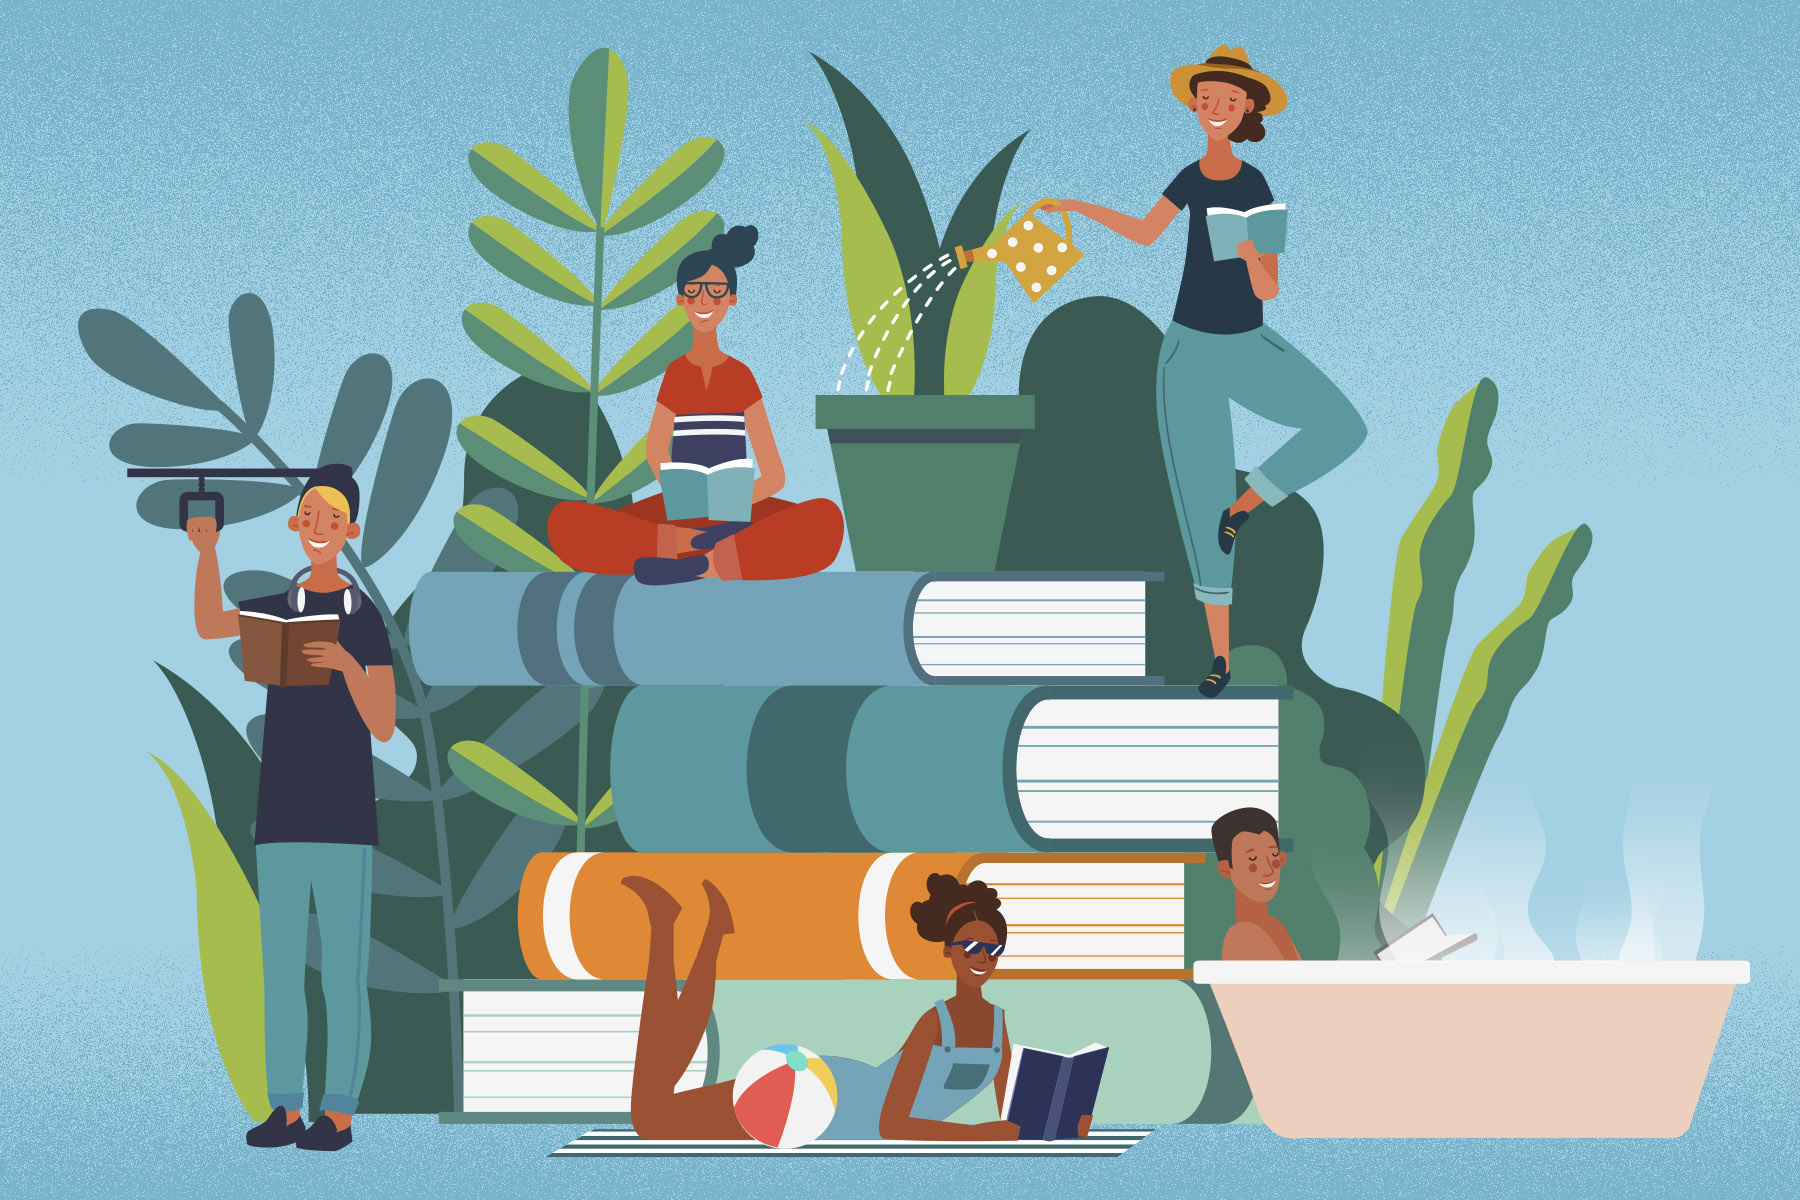 An illustration of people reading books in different ways, while perched around a large pile of books